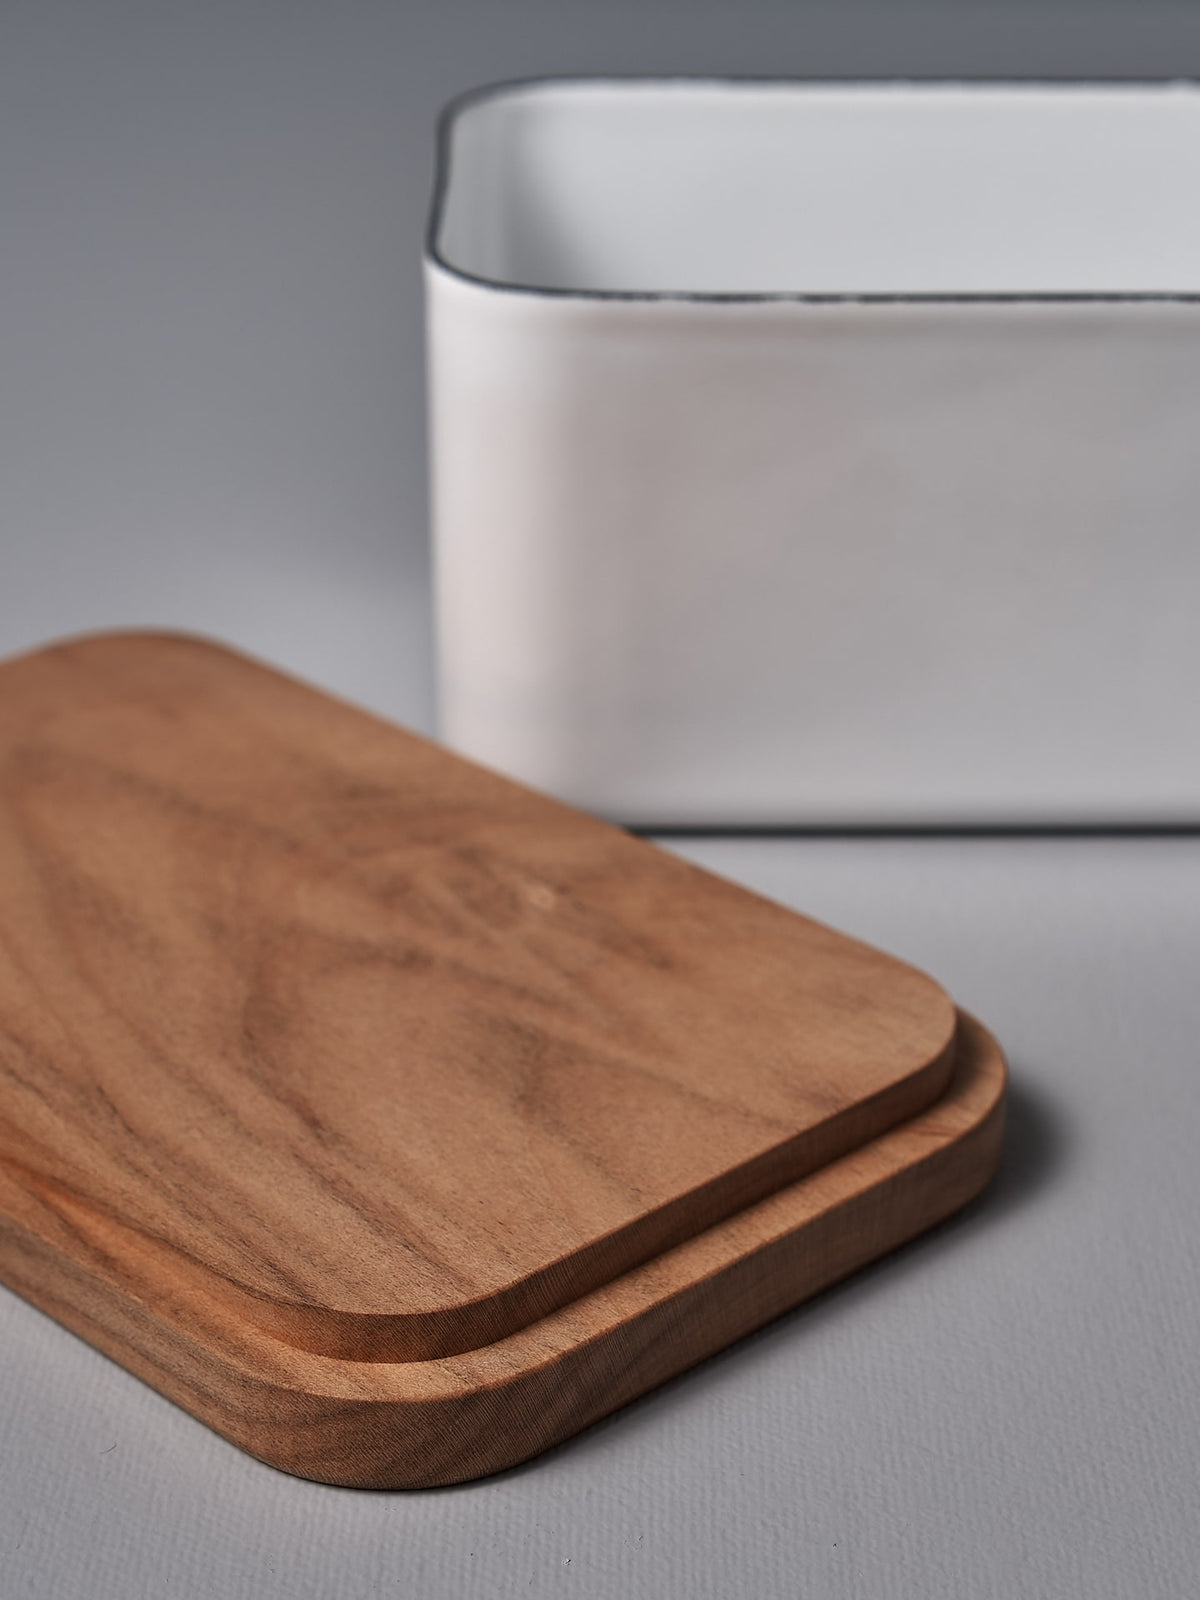 A Noda Horo Enamel Butter Case – 450g and a white bowl on a grey surface.